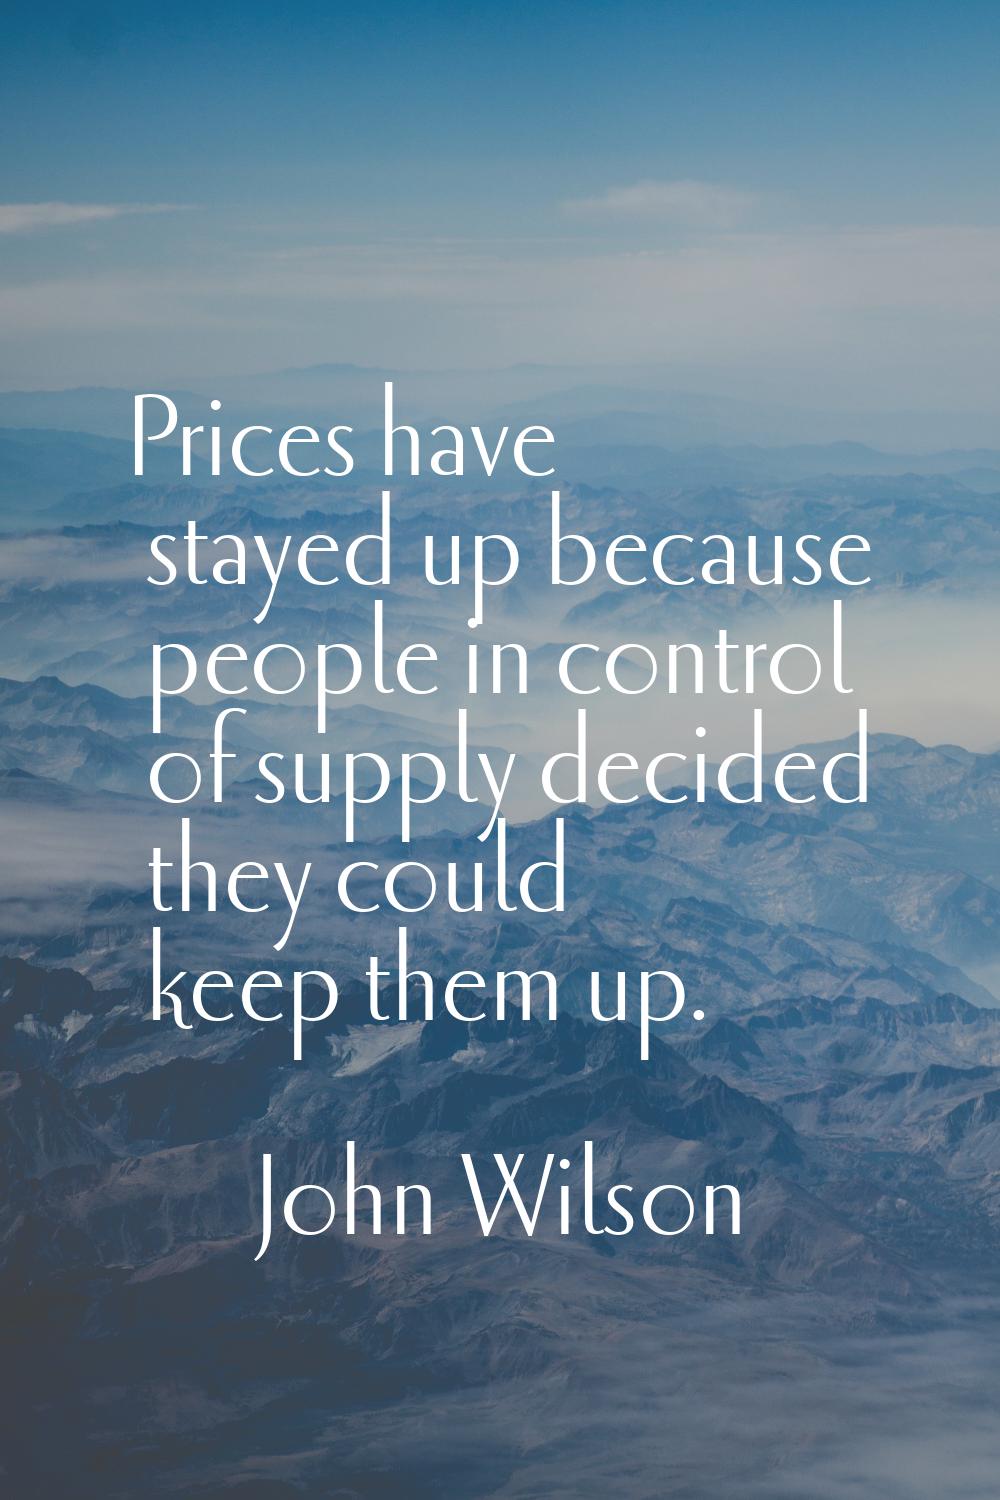 Prices have stayed up because people in control of supply decided they could keep them up.